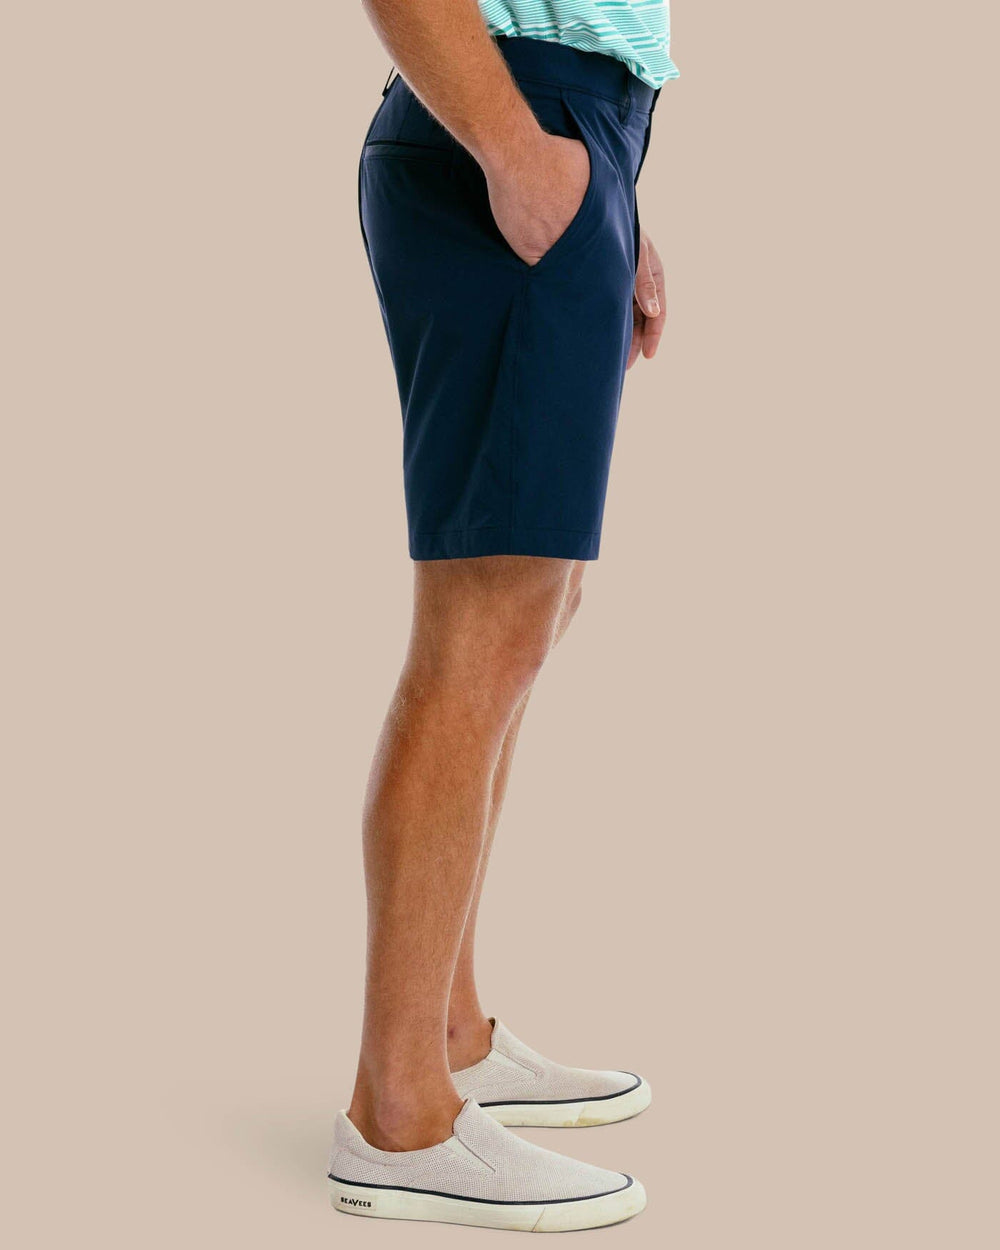 The side of the Men's Gulf 8 Inch Brrr Performance Short by Southern Tide - True Navy